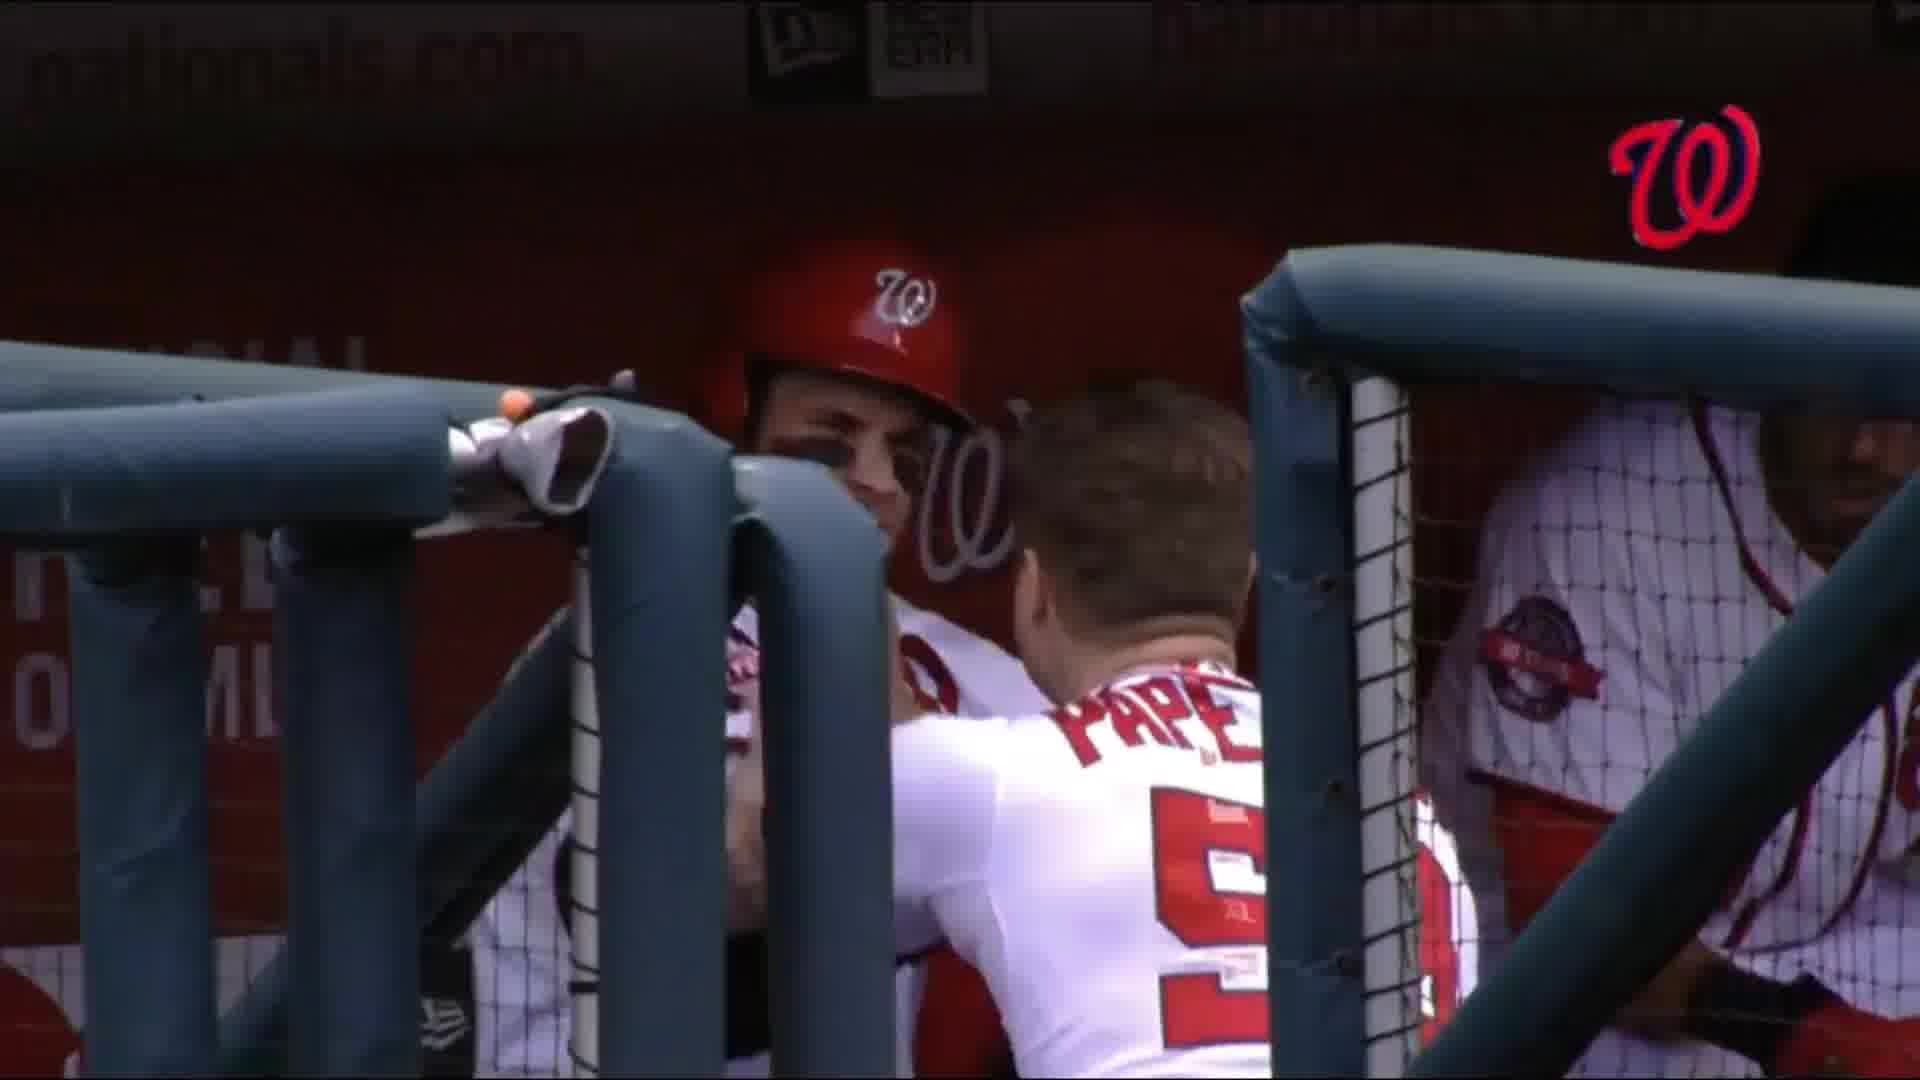 Jonathan Papelbon Suspended 4 Games, But Bryce Harper Shares Blame for  Dugout Fight